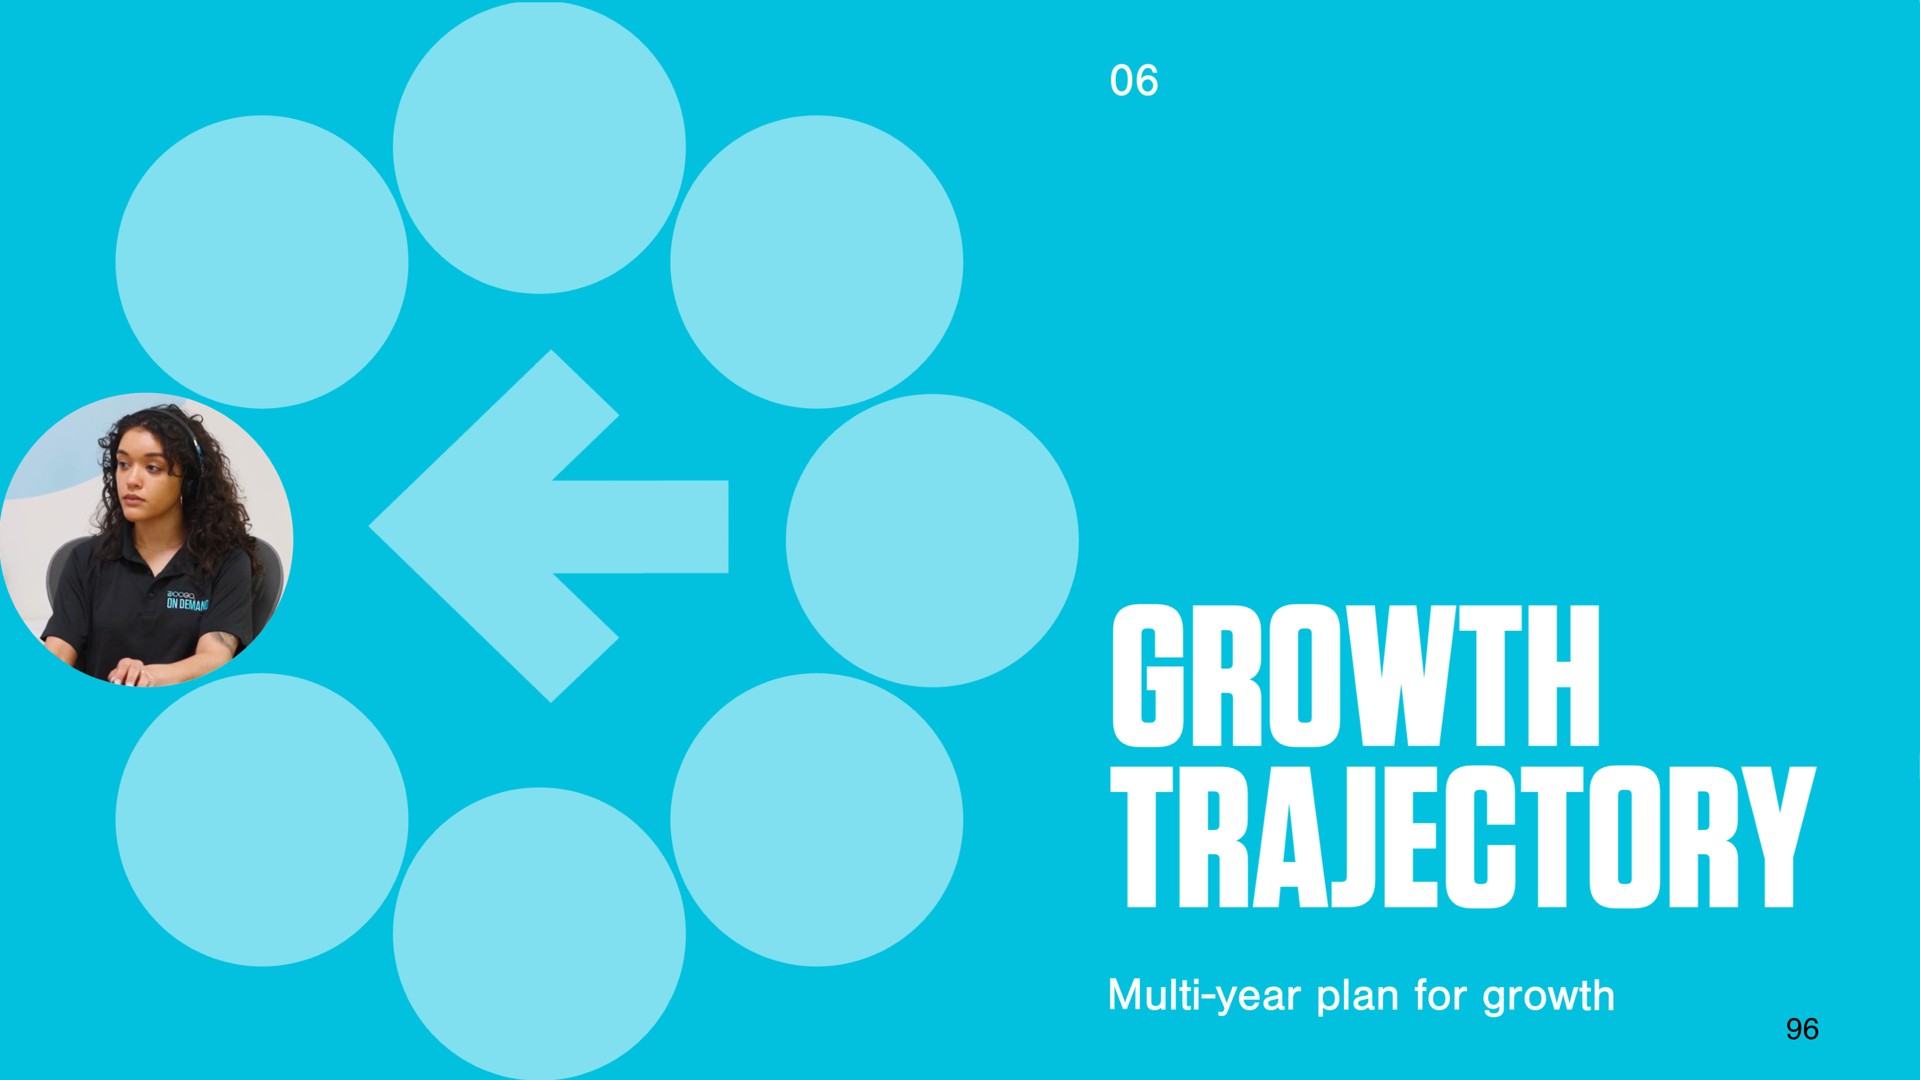 year plan for growth saa | DocGo